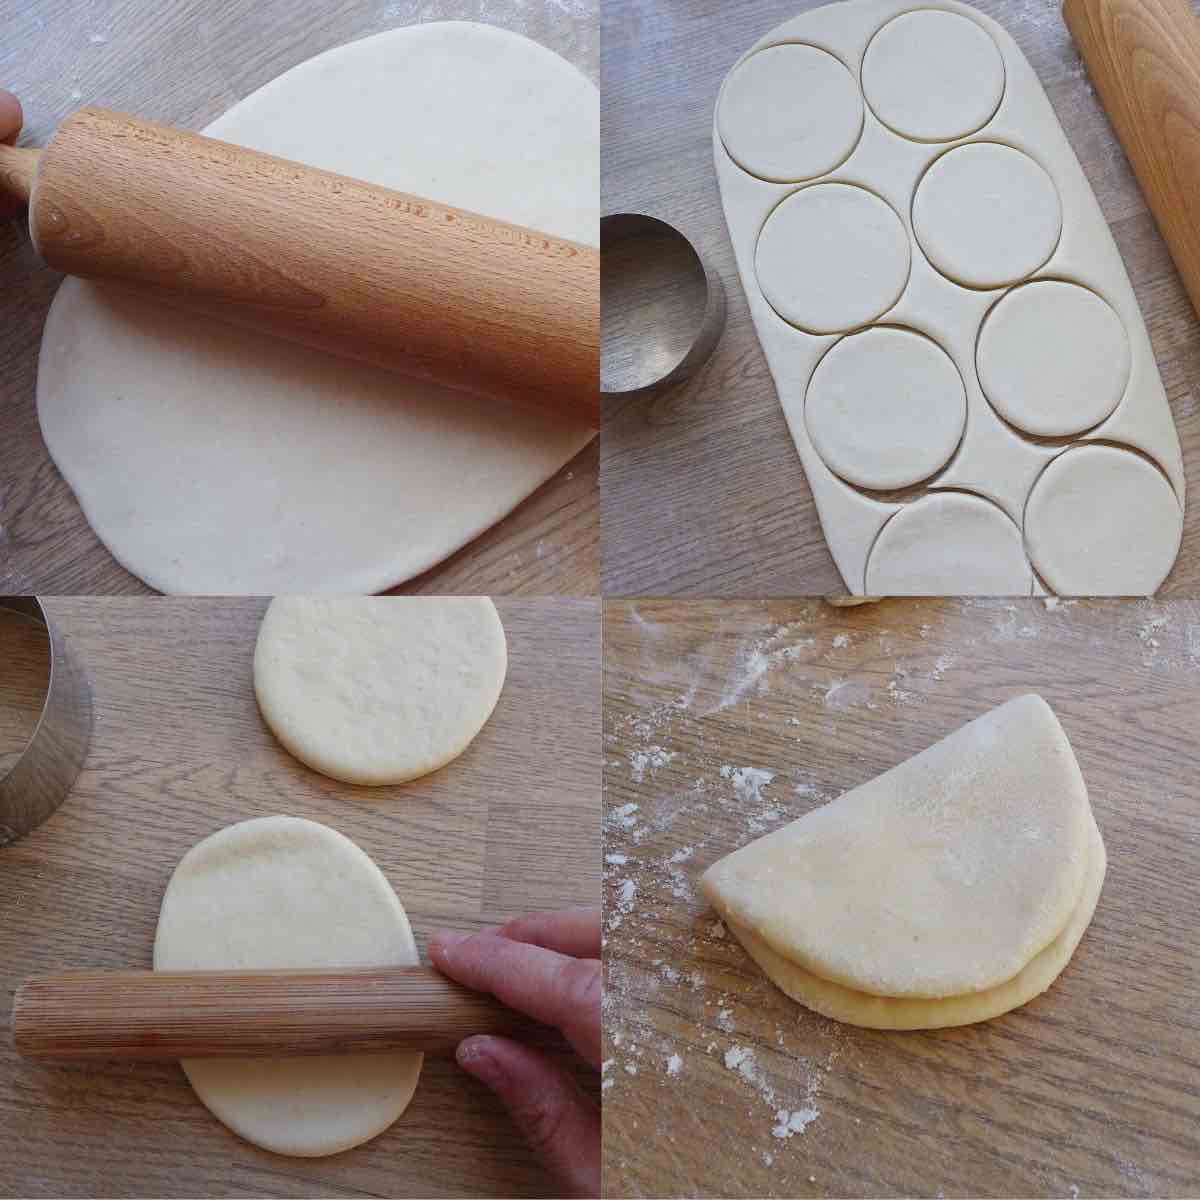 shaping bao with rolling pin and cutter.